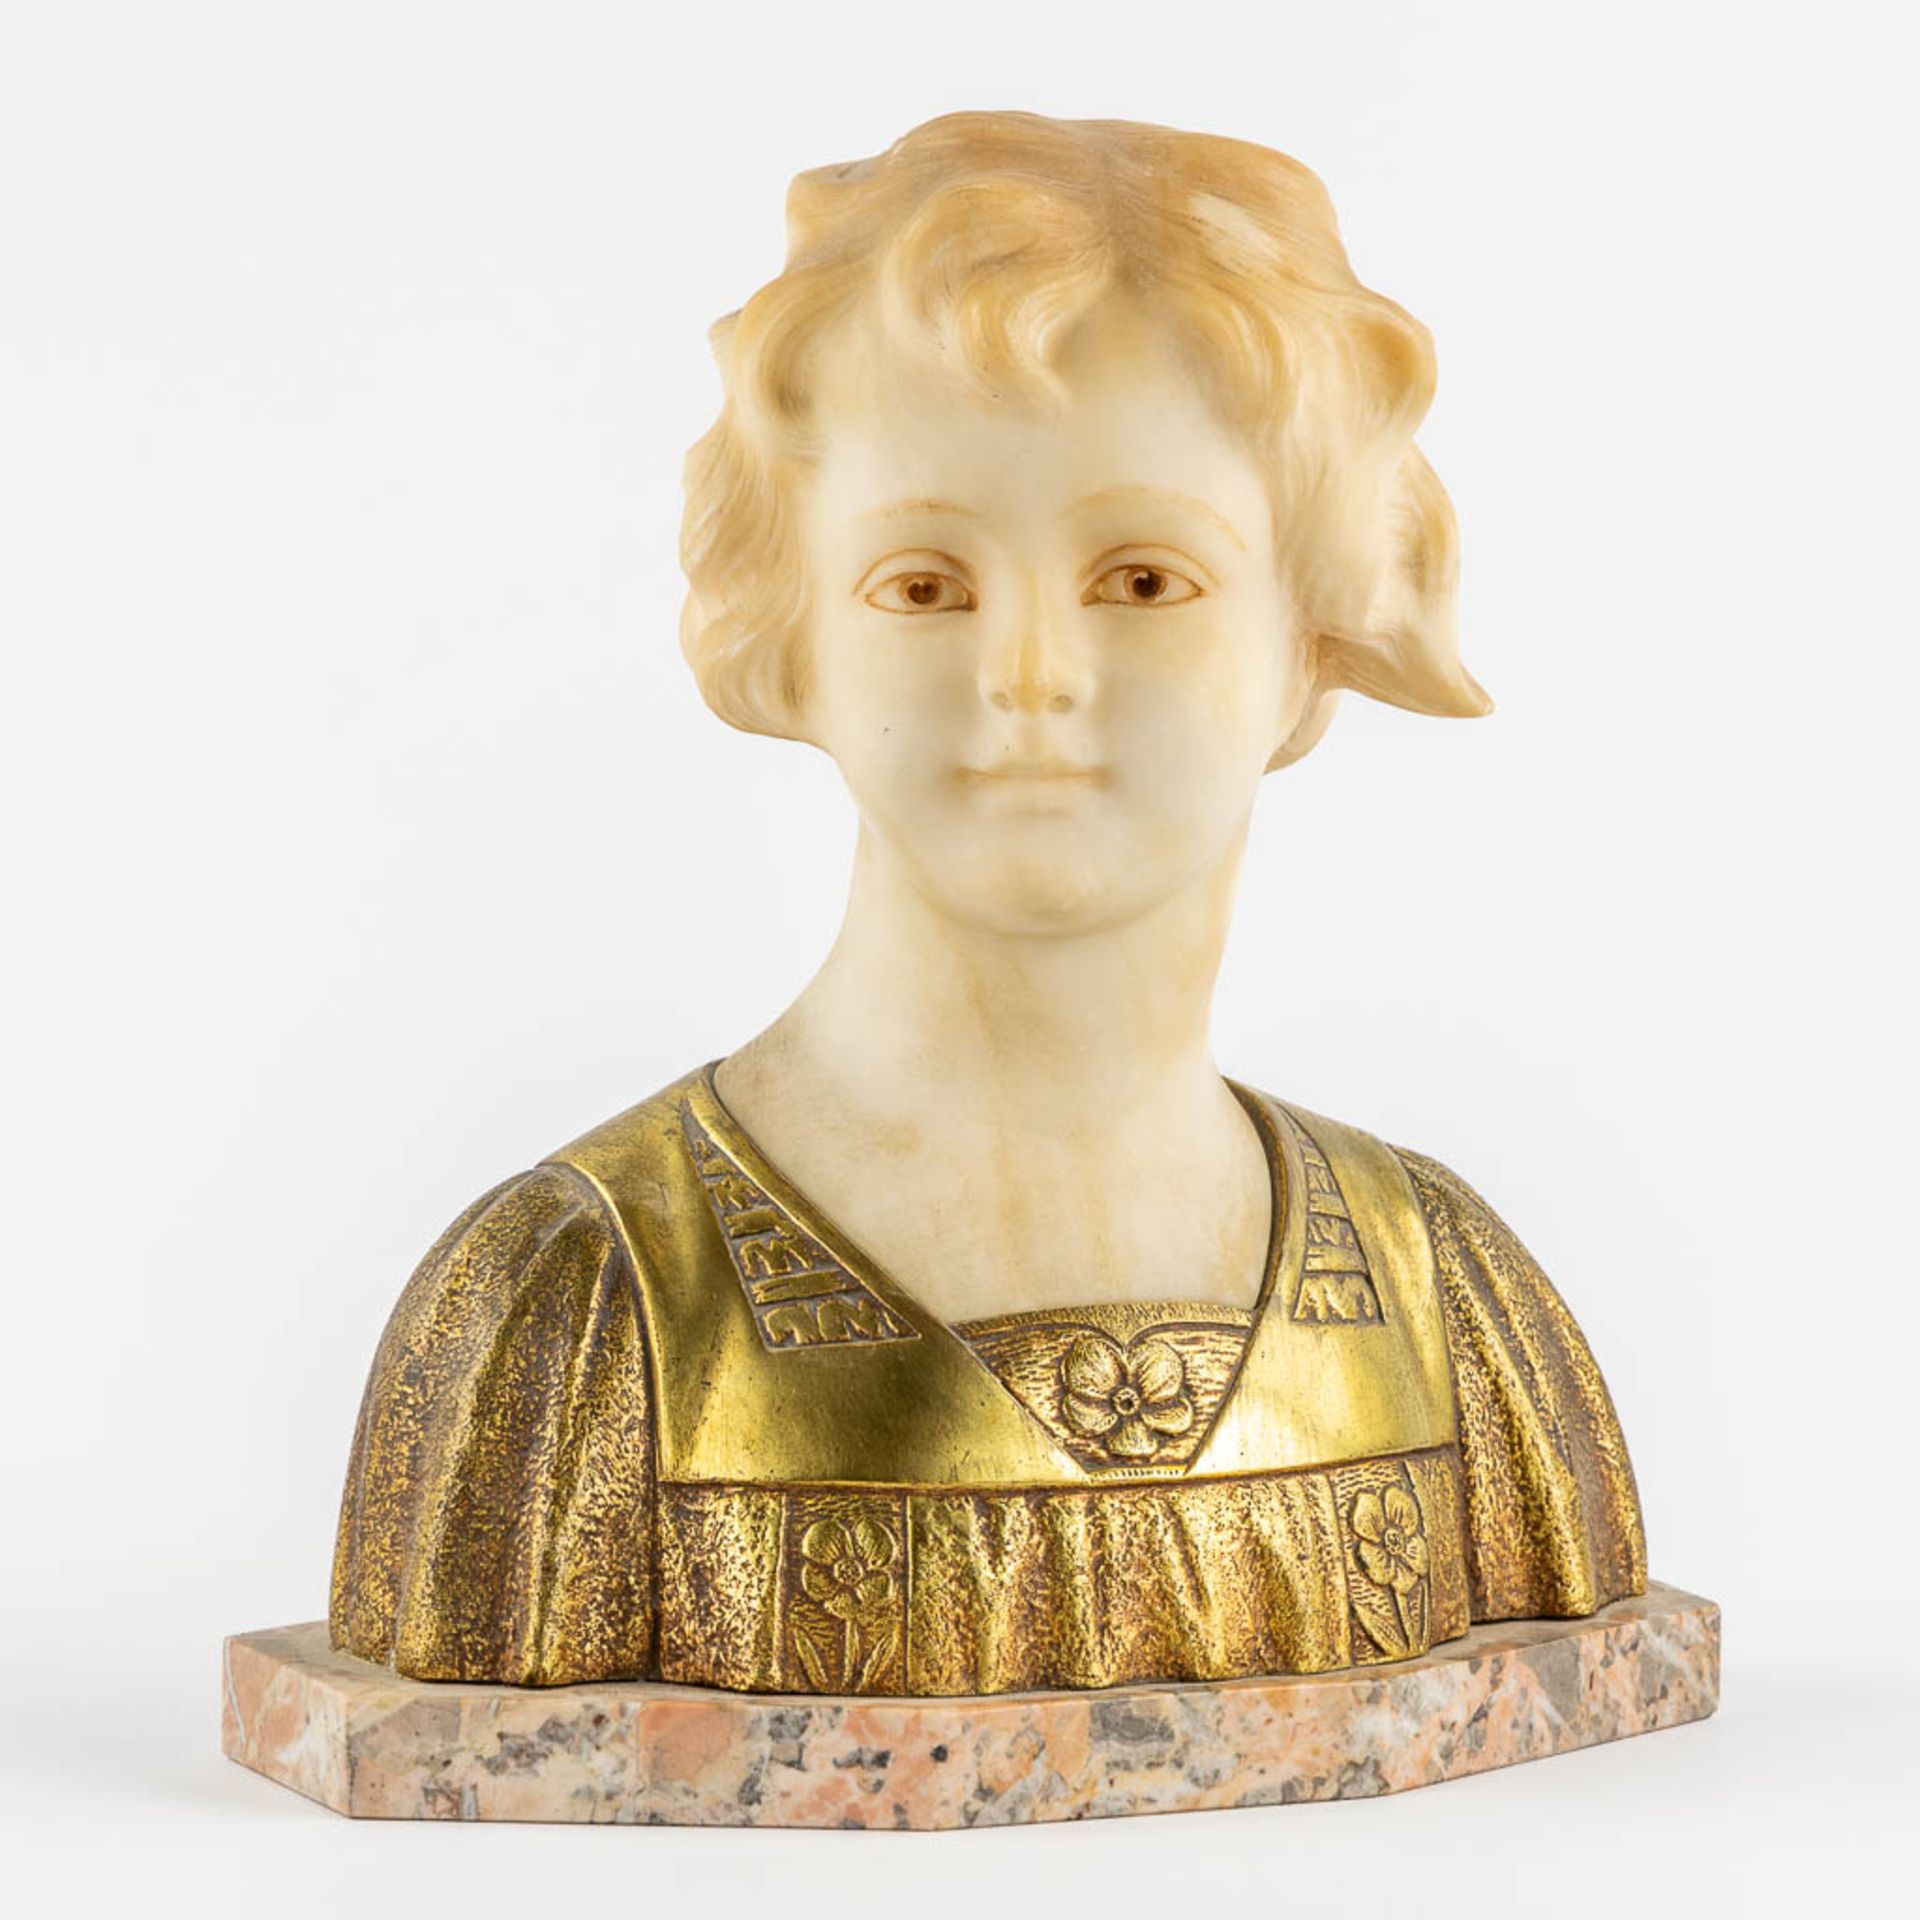 Bust of a Young Lady, gilt bronze and sculptured alabaster. Signed Cecchelli. (L:12 x W:26 x H:28 cm